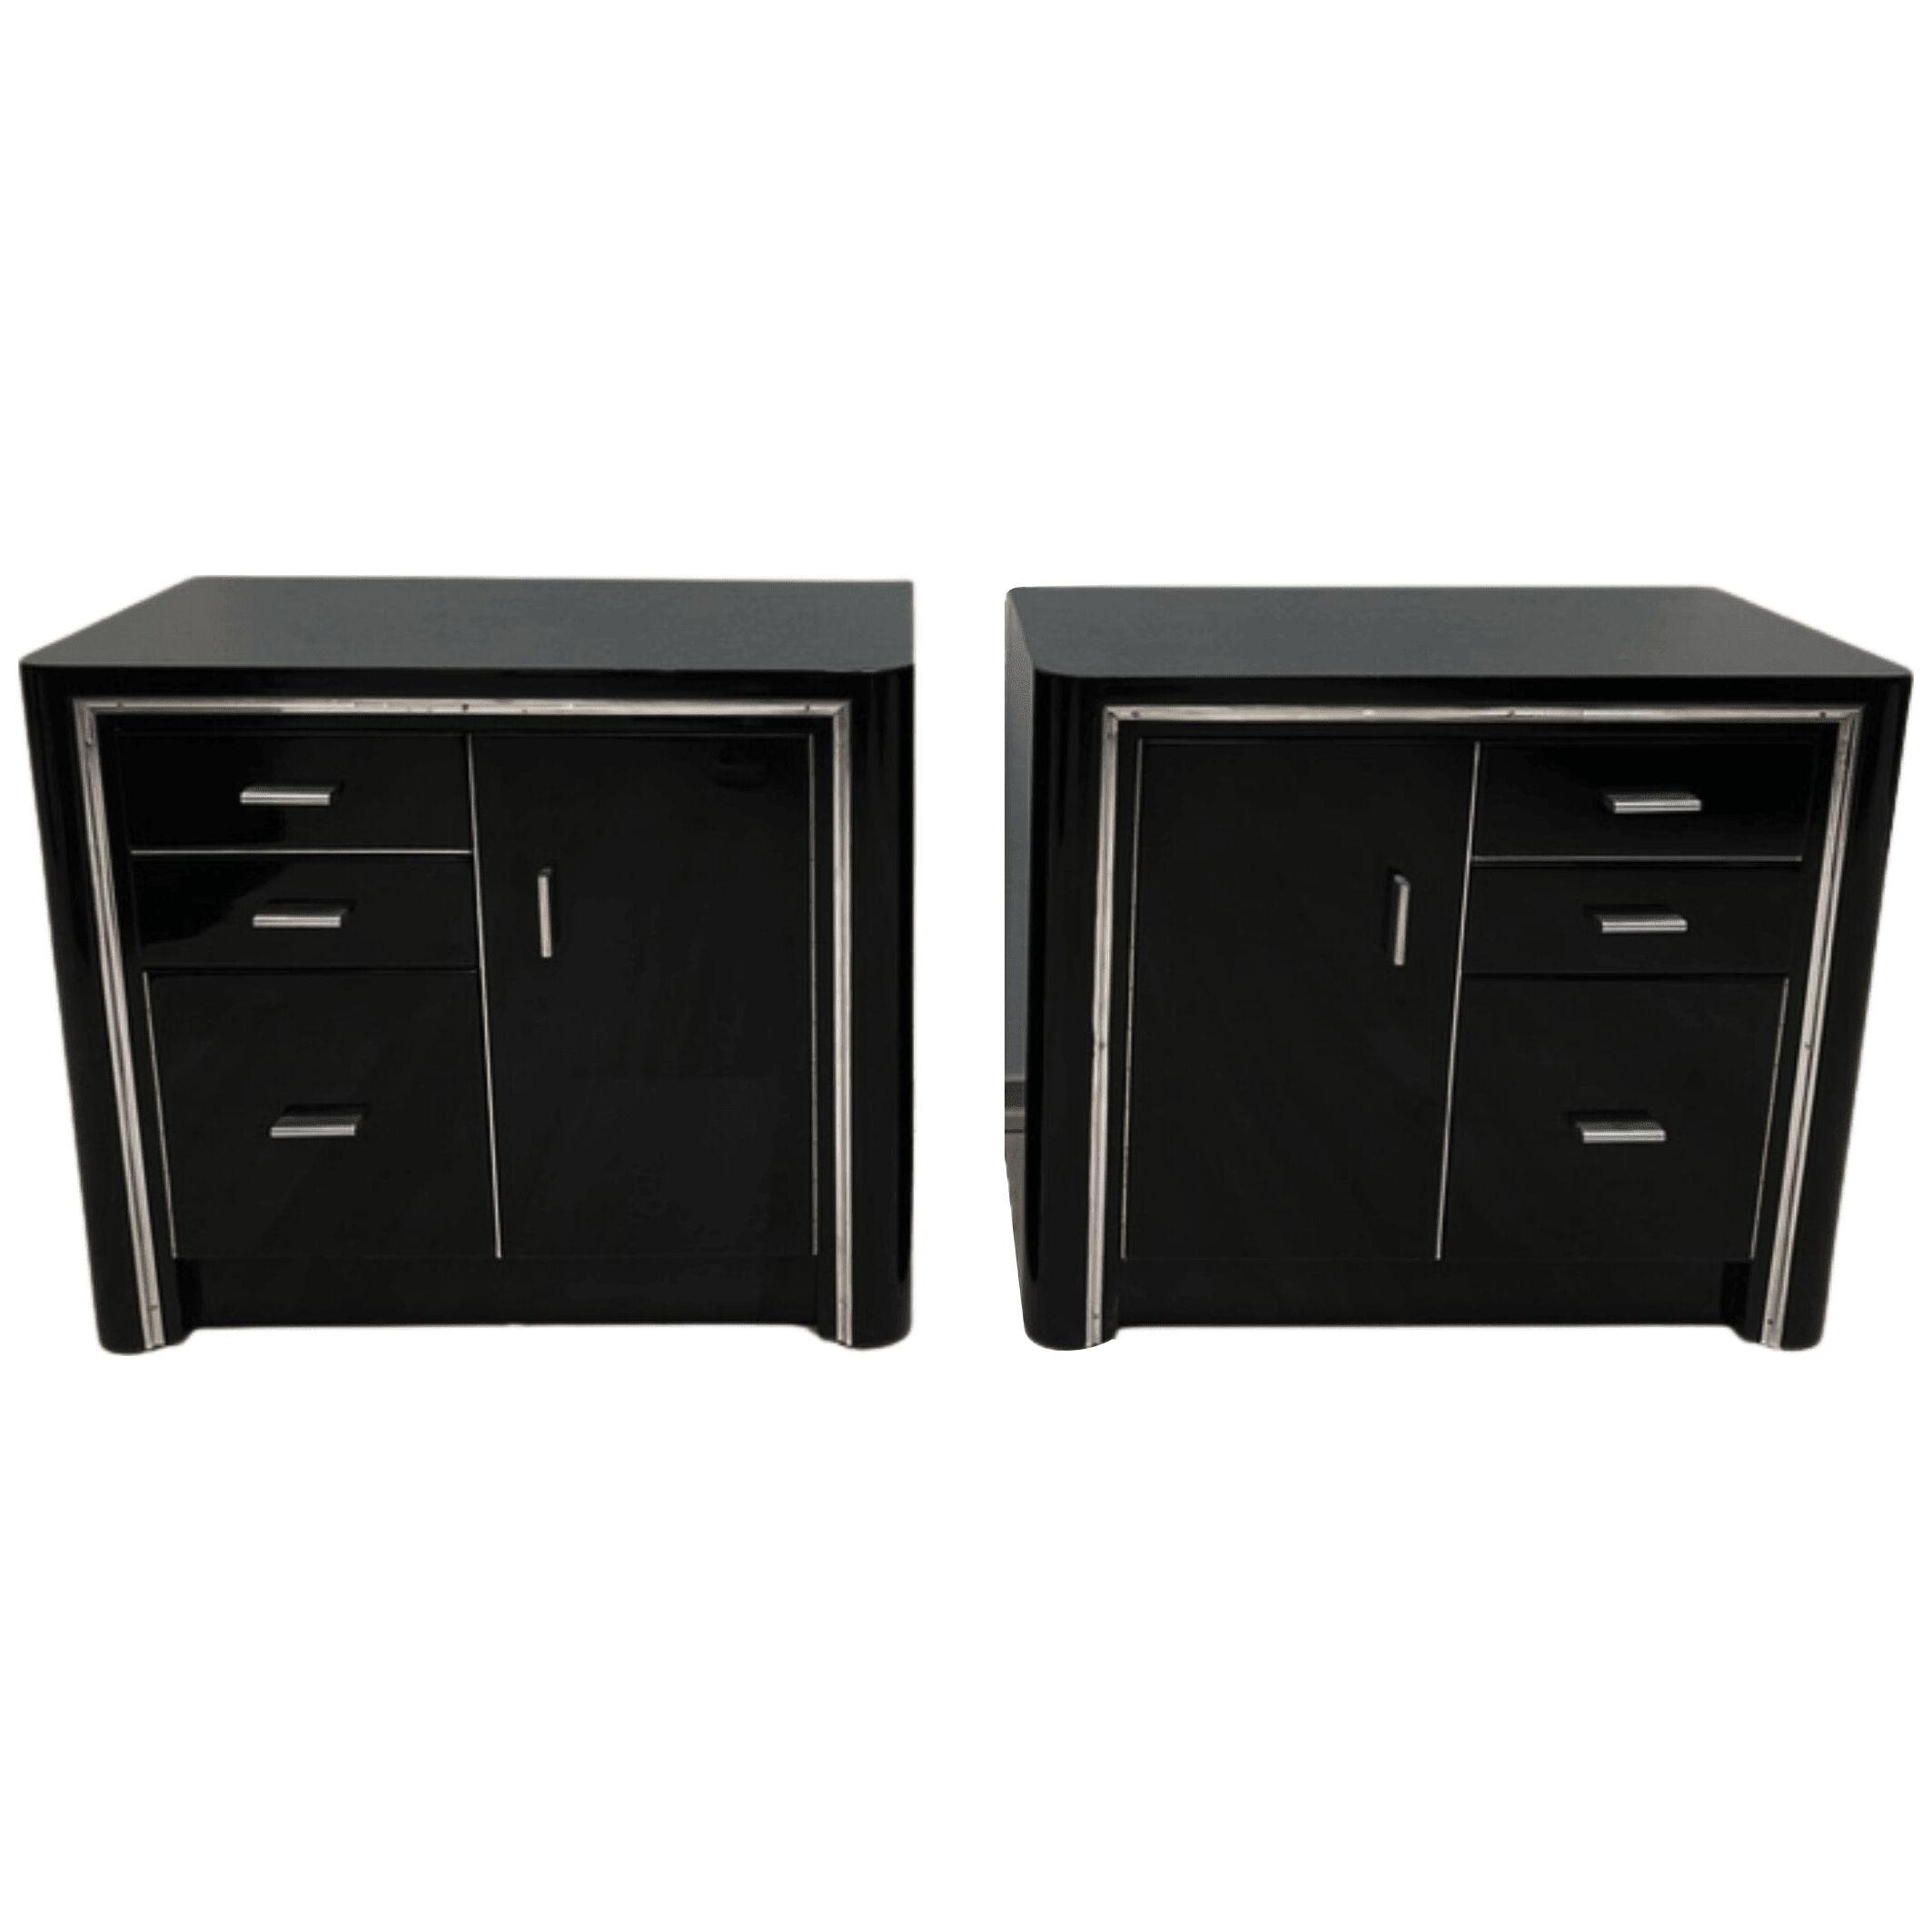 Art Deco Nightstands, Black lacquer and Metal, France circa 1940